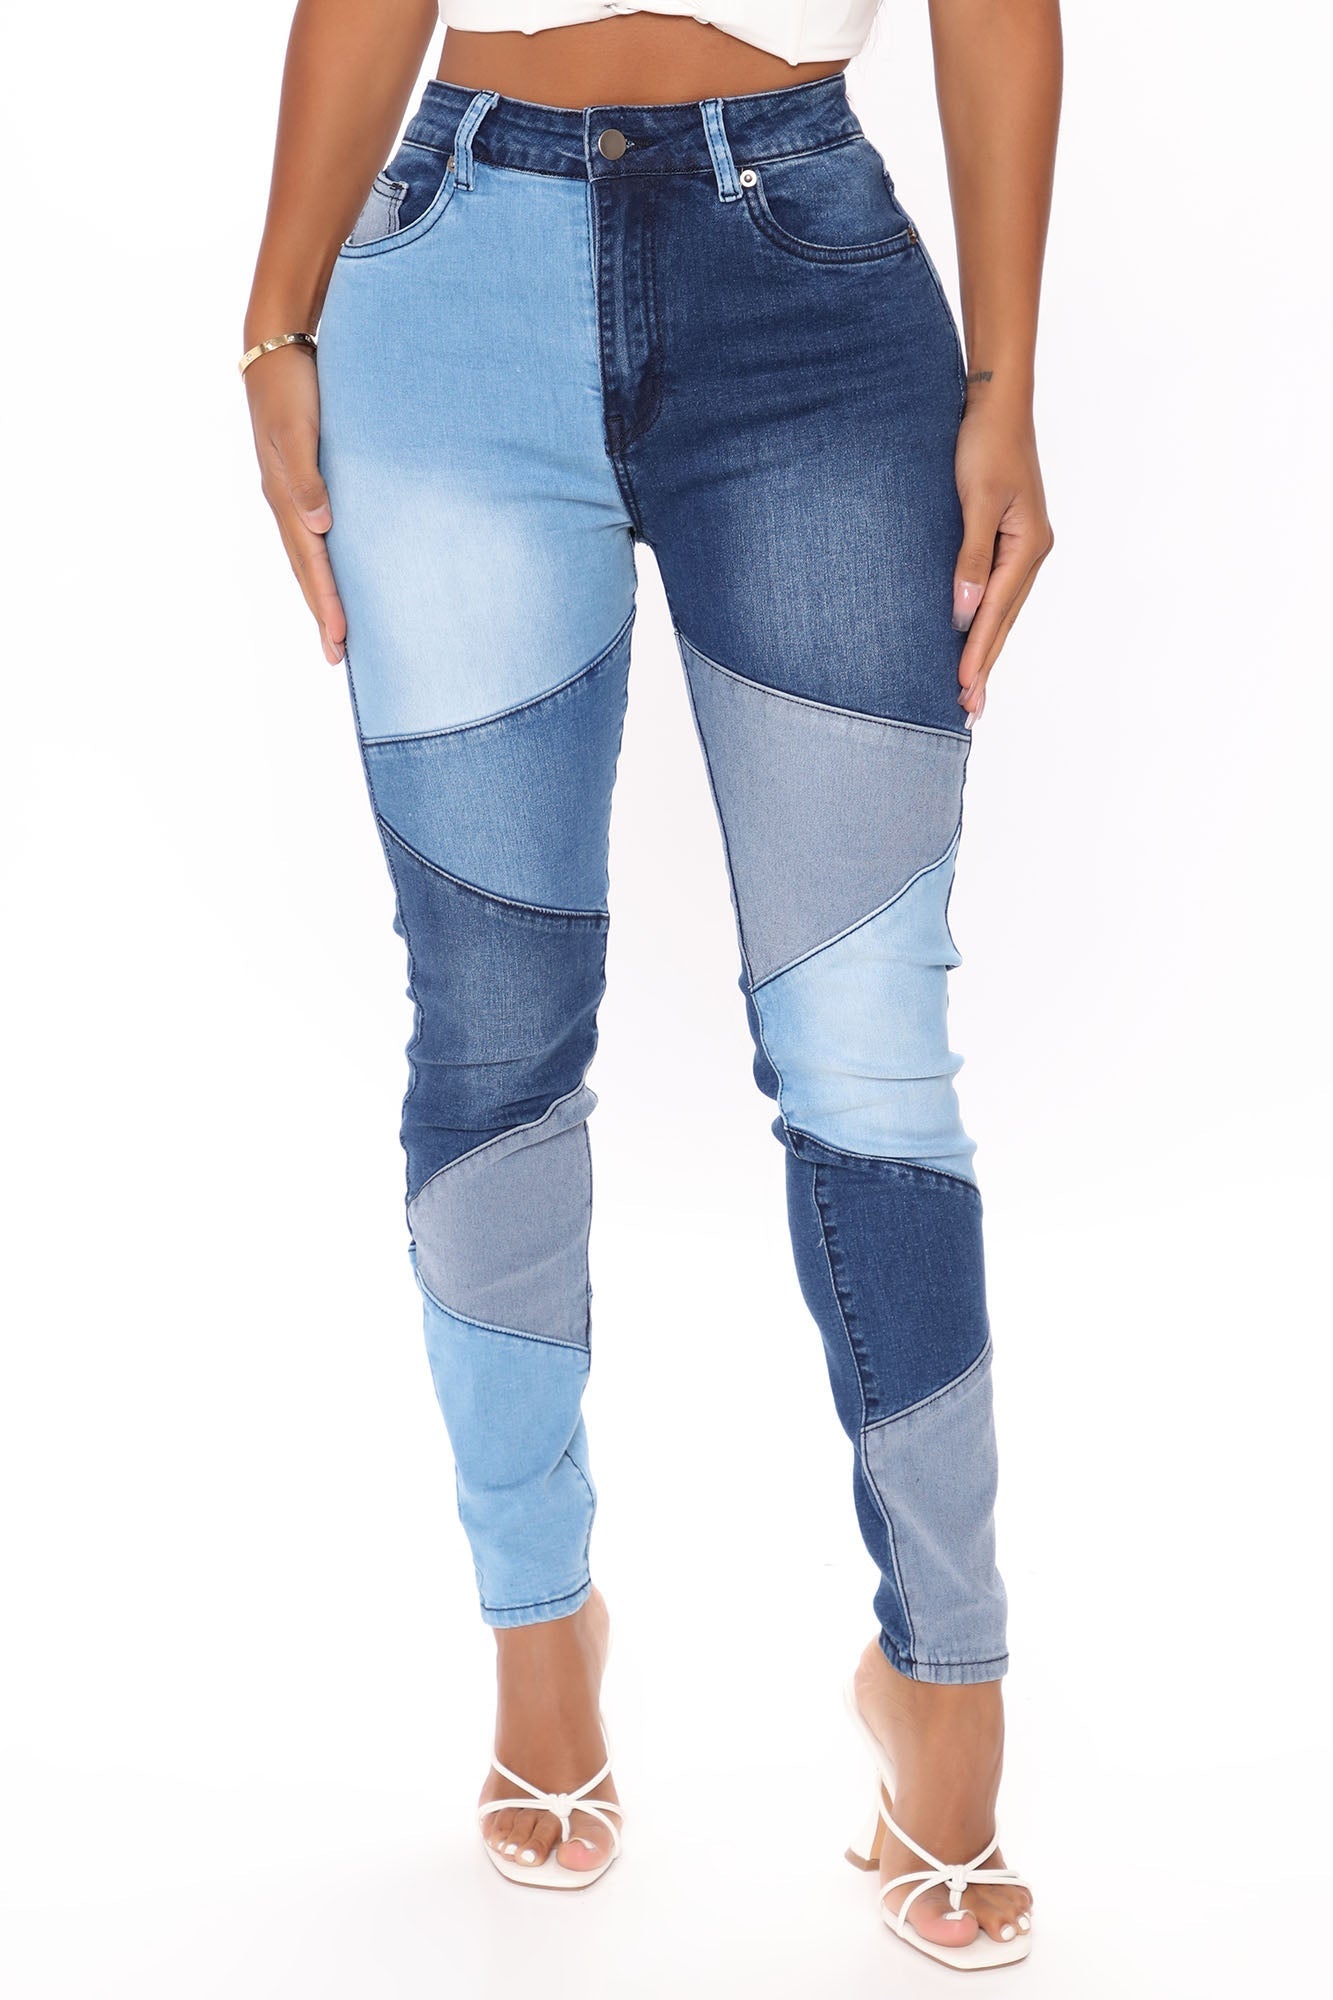 All Fixed Up Patchwork Skinny Jeans - Blue/combo